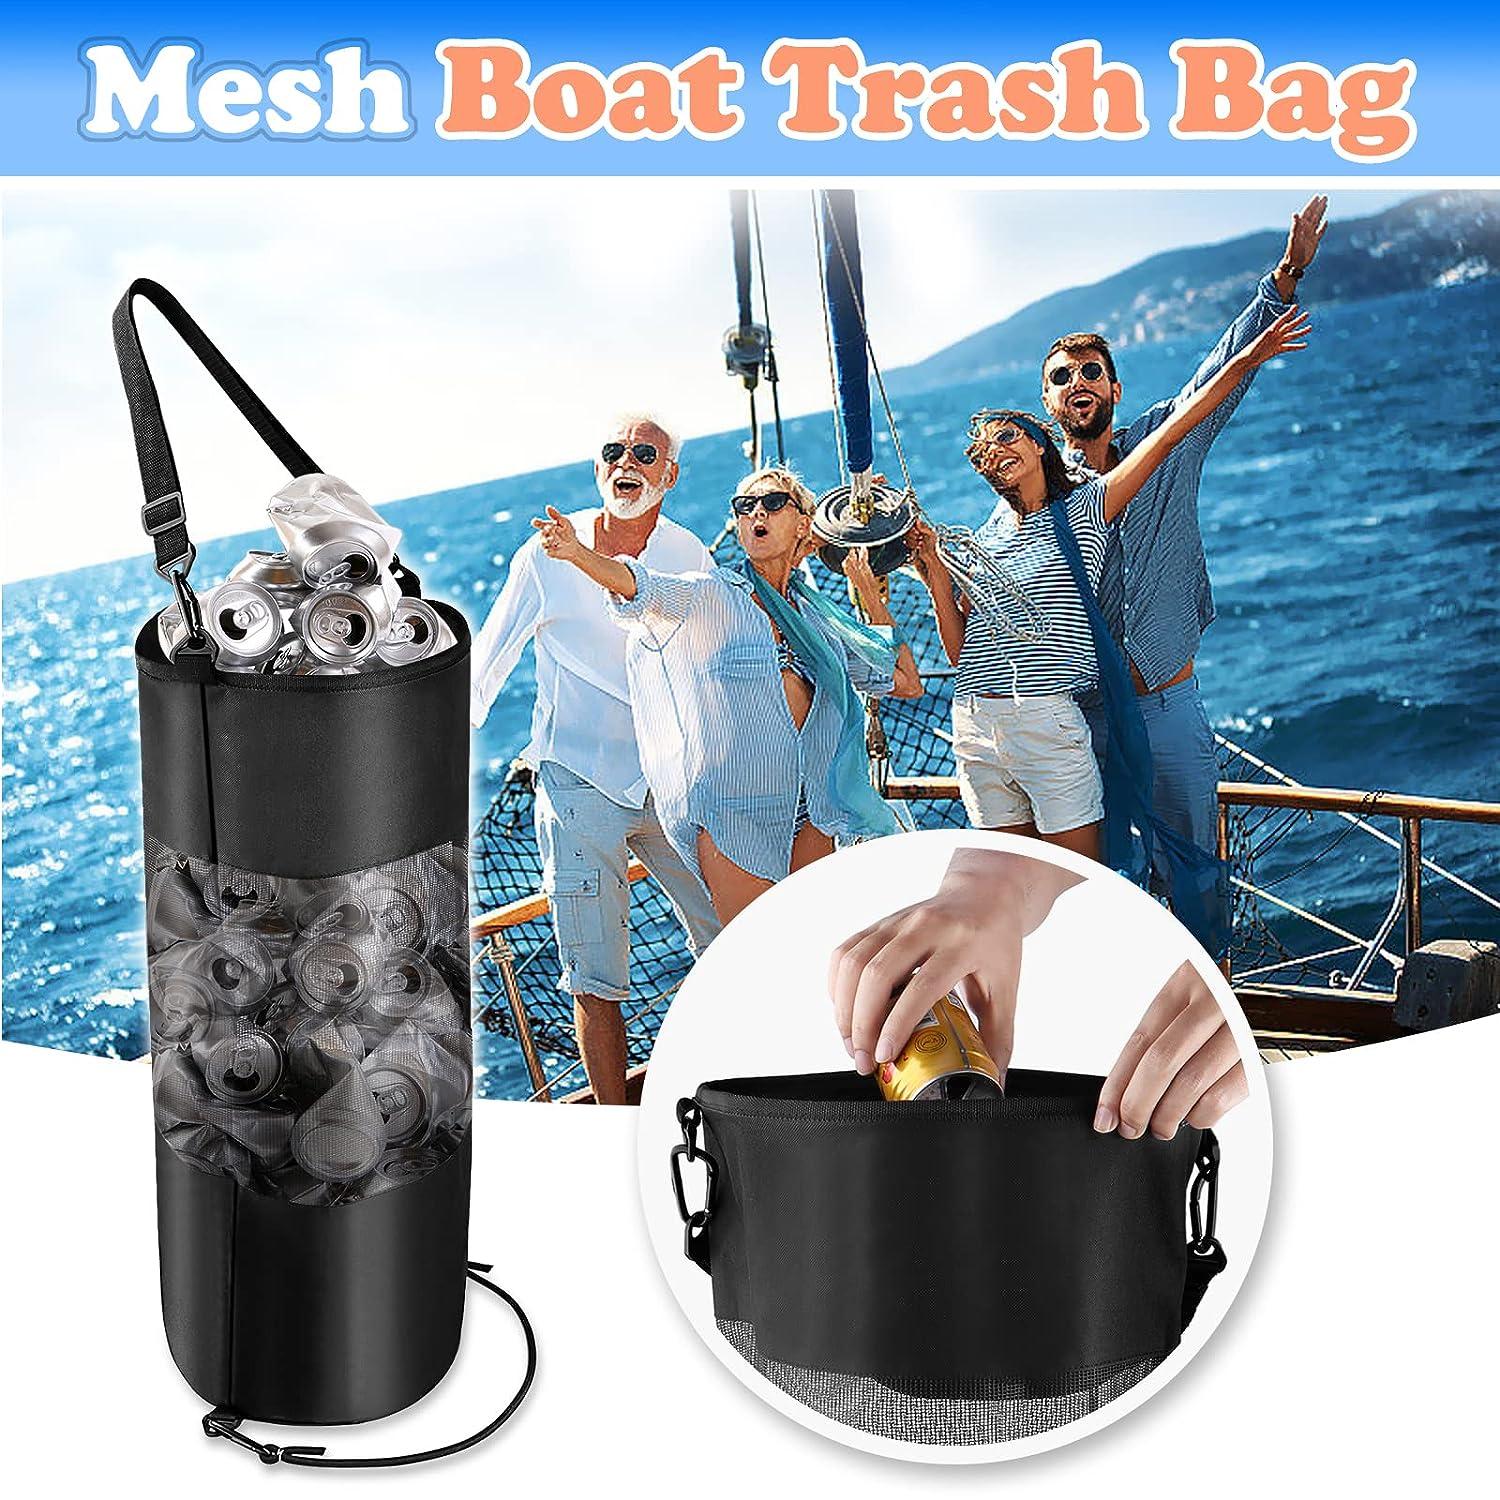 Boat Trash Bag Can Reusable Mesh Boat Garbage Container Boating